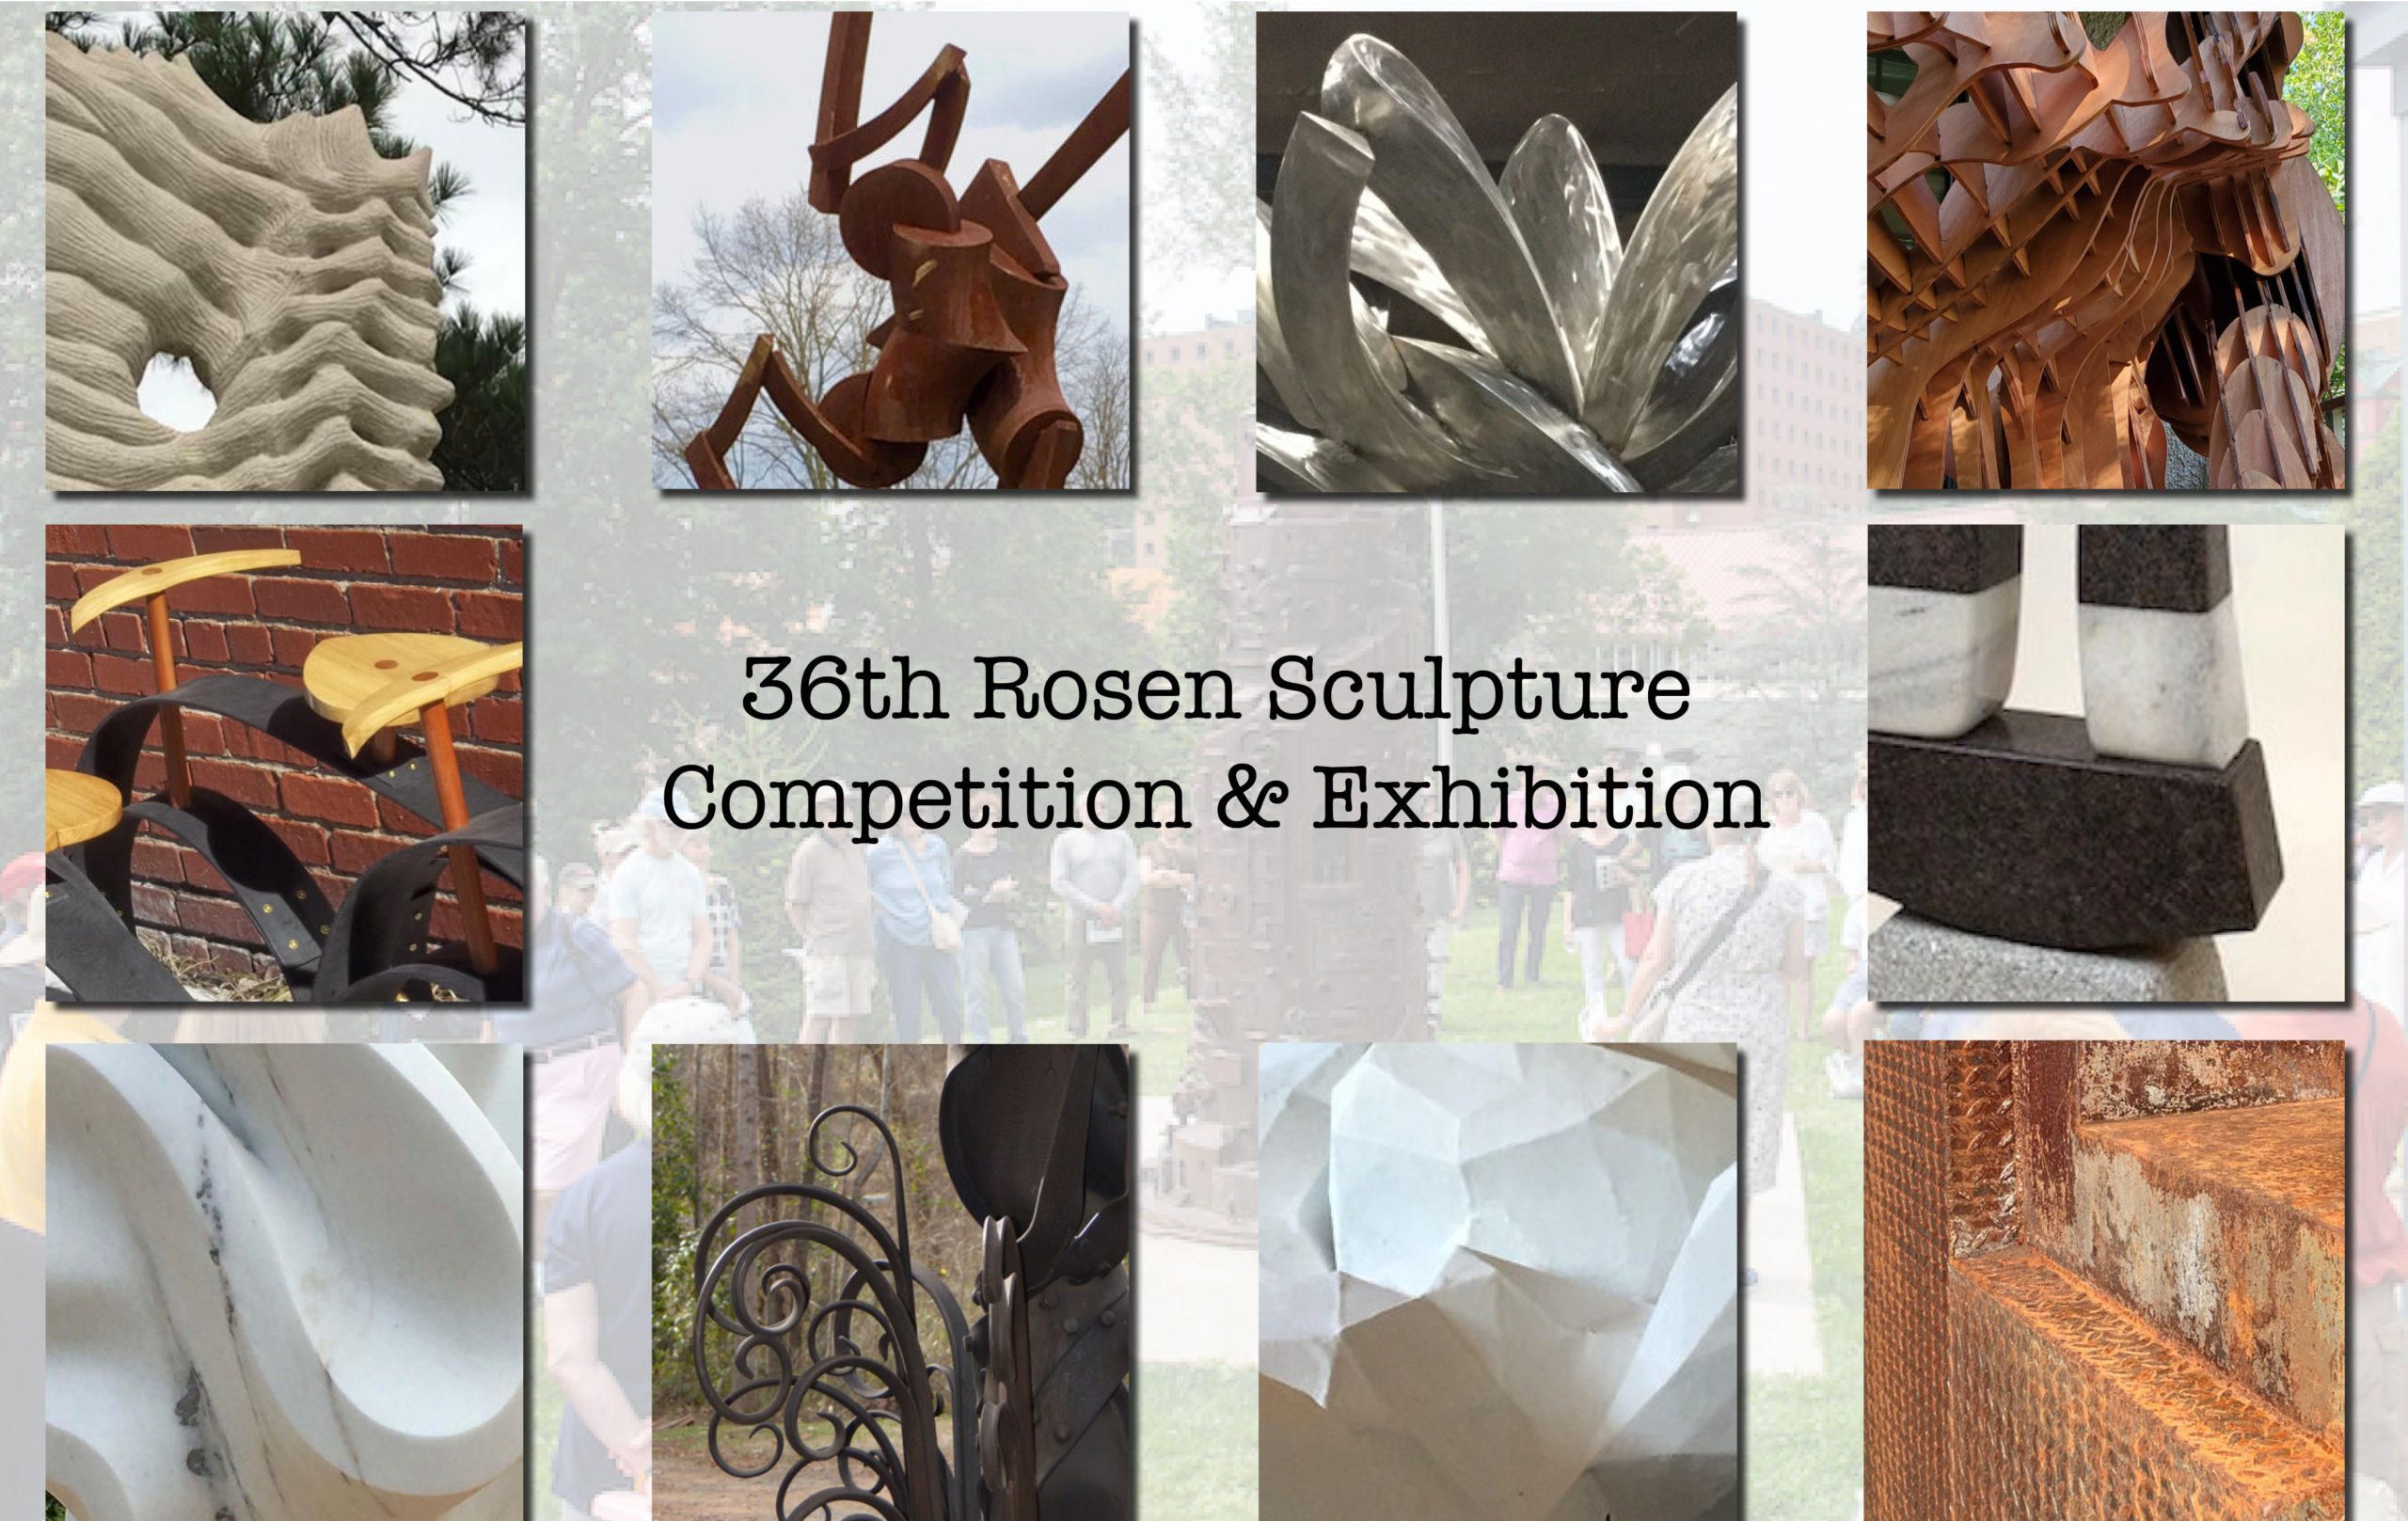 36th Rosen Sculpture Competition finalists